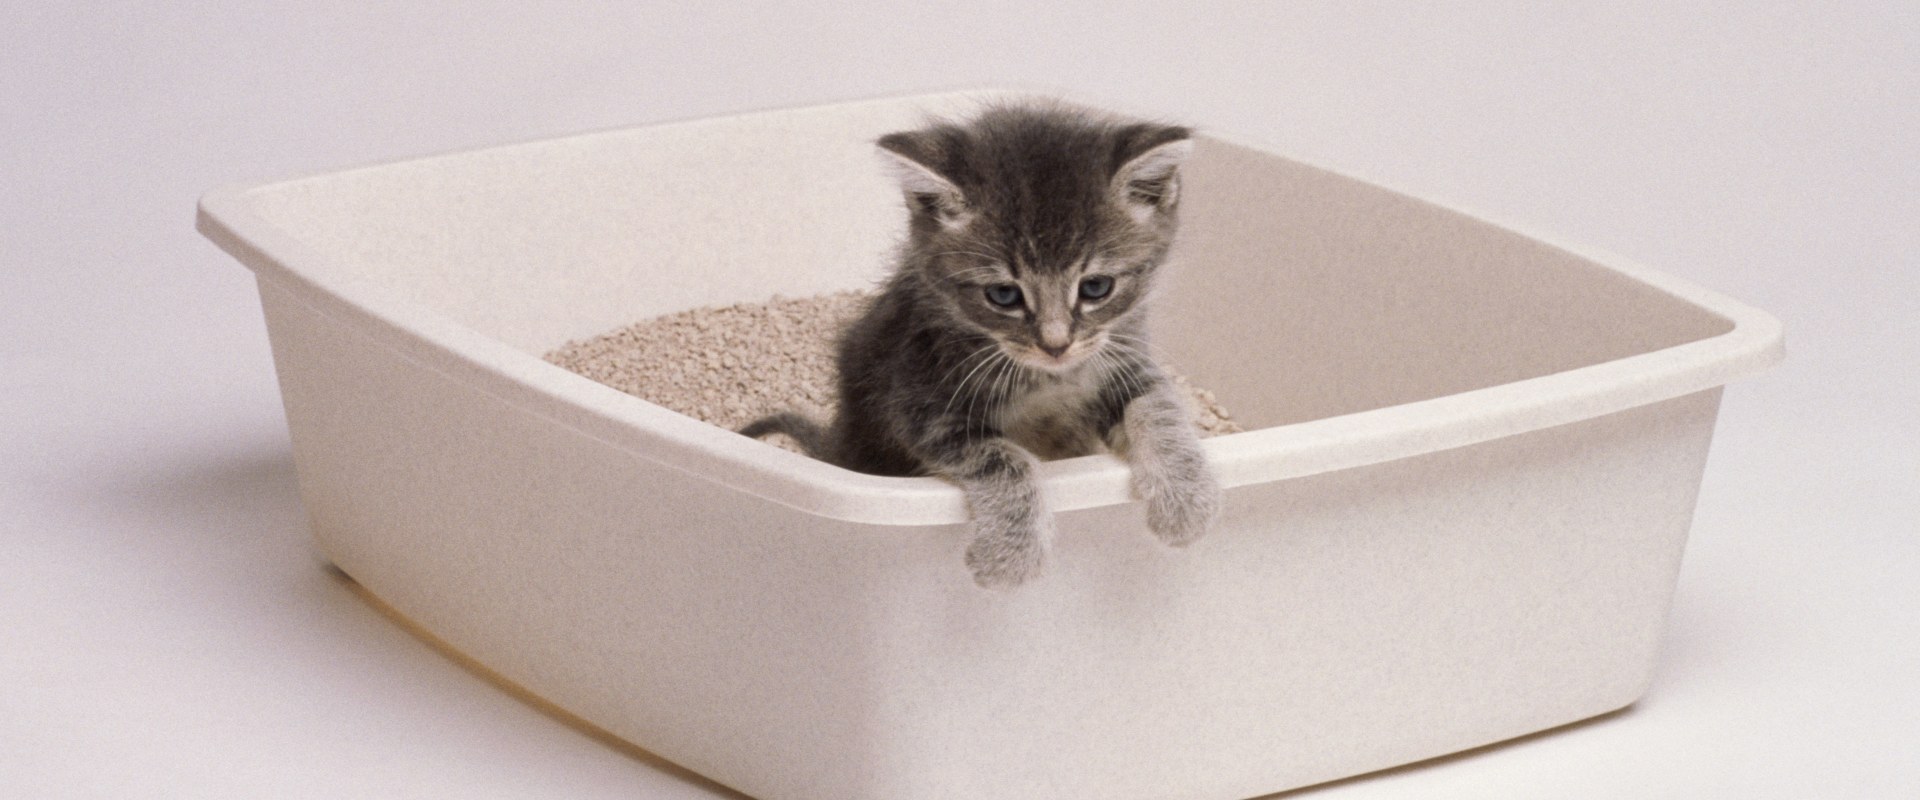 Choosing a Litterbox for Indoor Cats